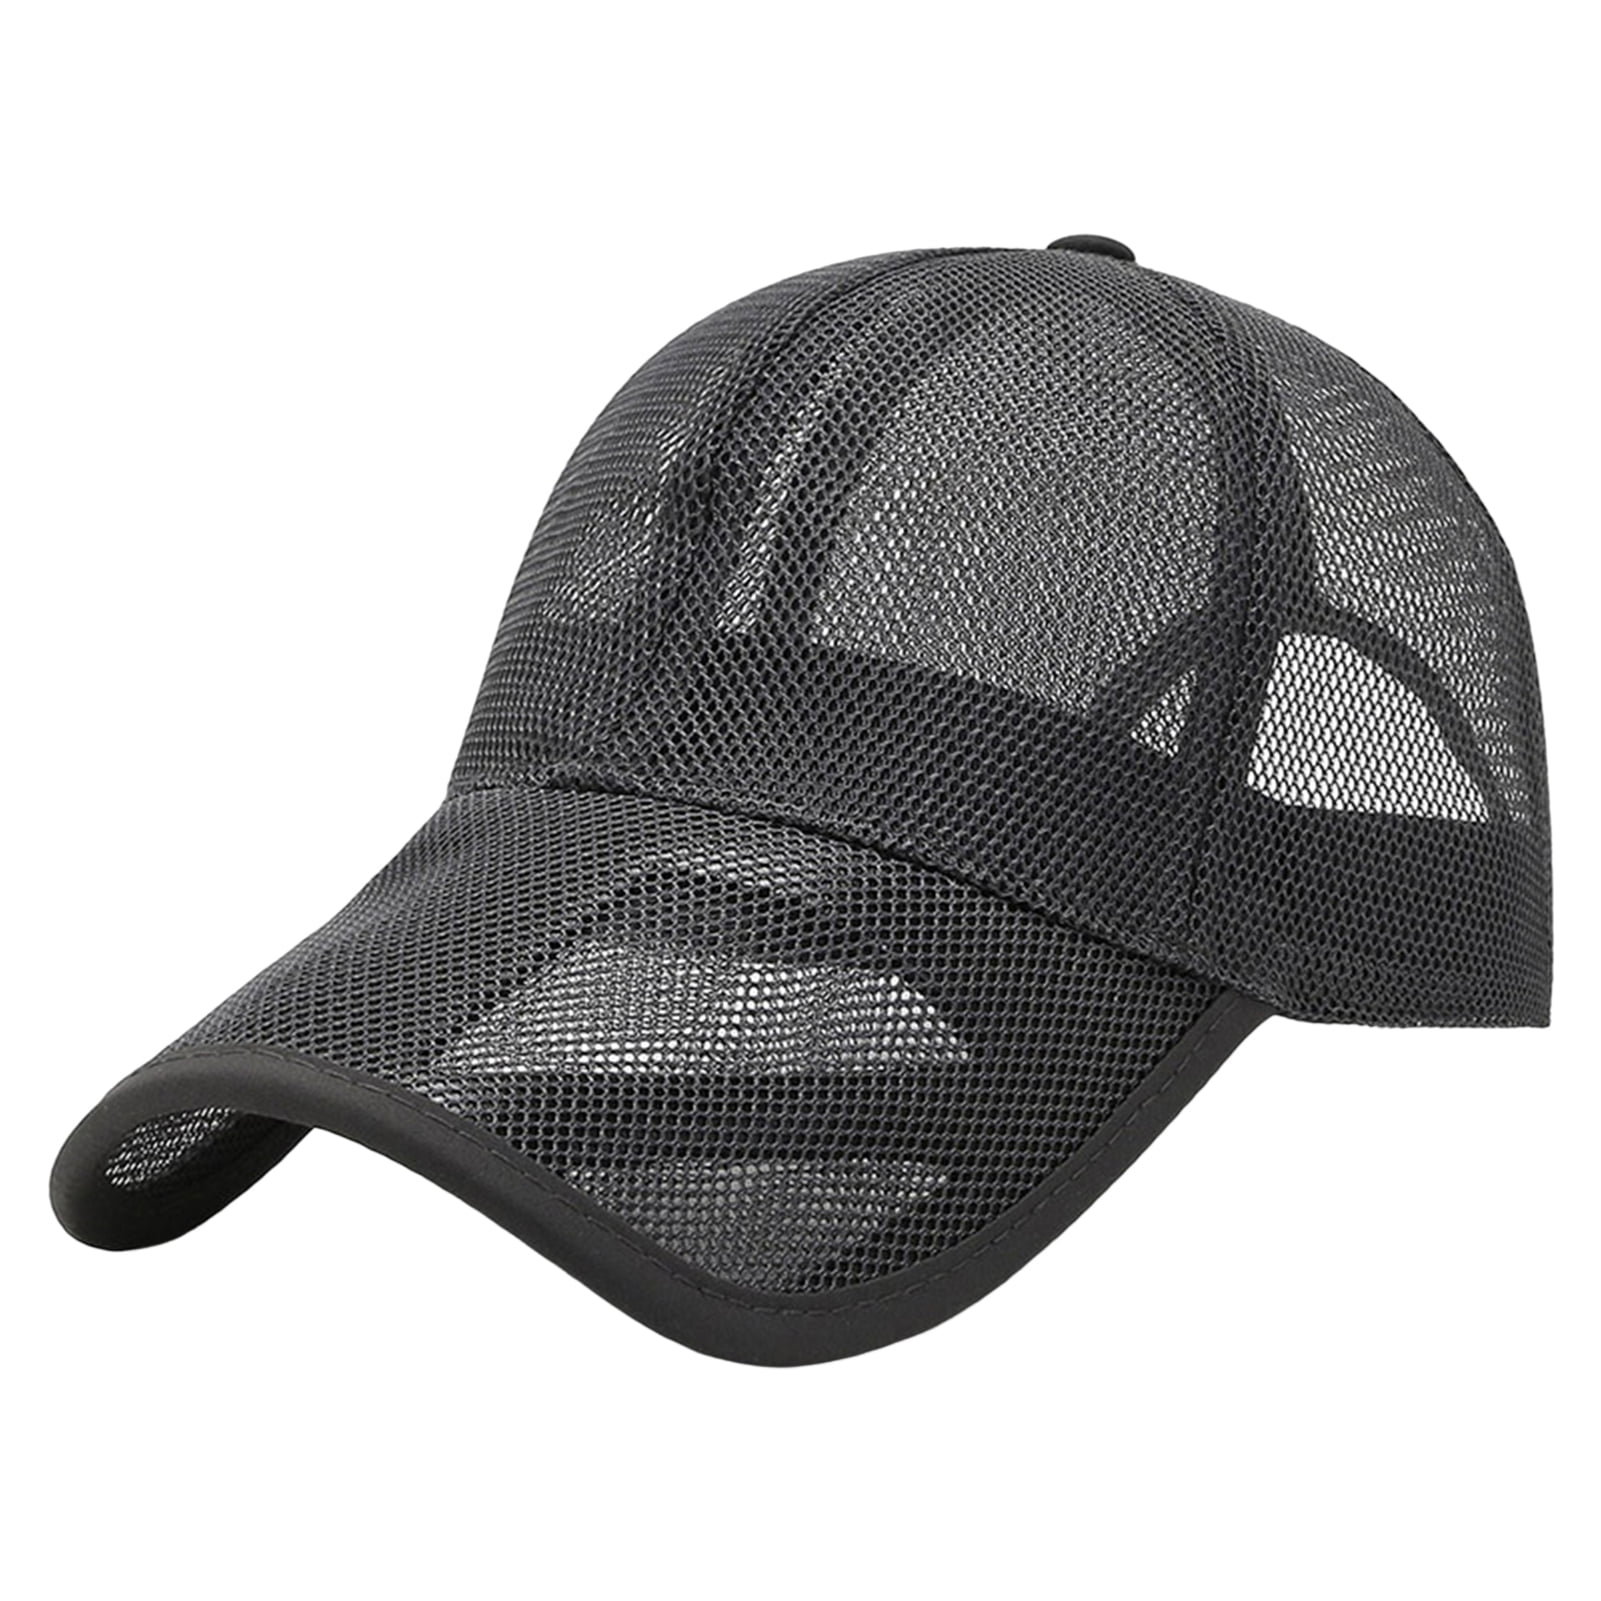 Zylioo Unisex Breathable Mesh Baseball Cap,Quick Dry Trucker Hats for Big  Heads,Low Profile Adjustable Running Hat Black at  Women's Clothing  store